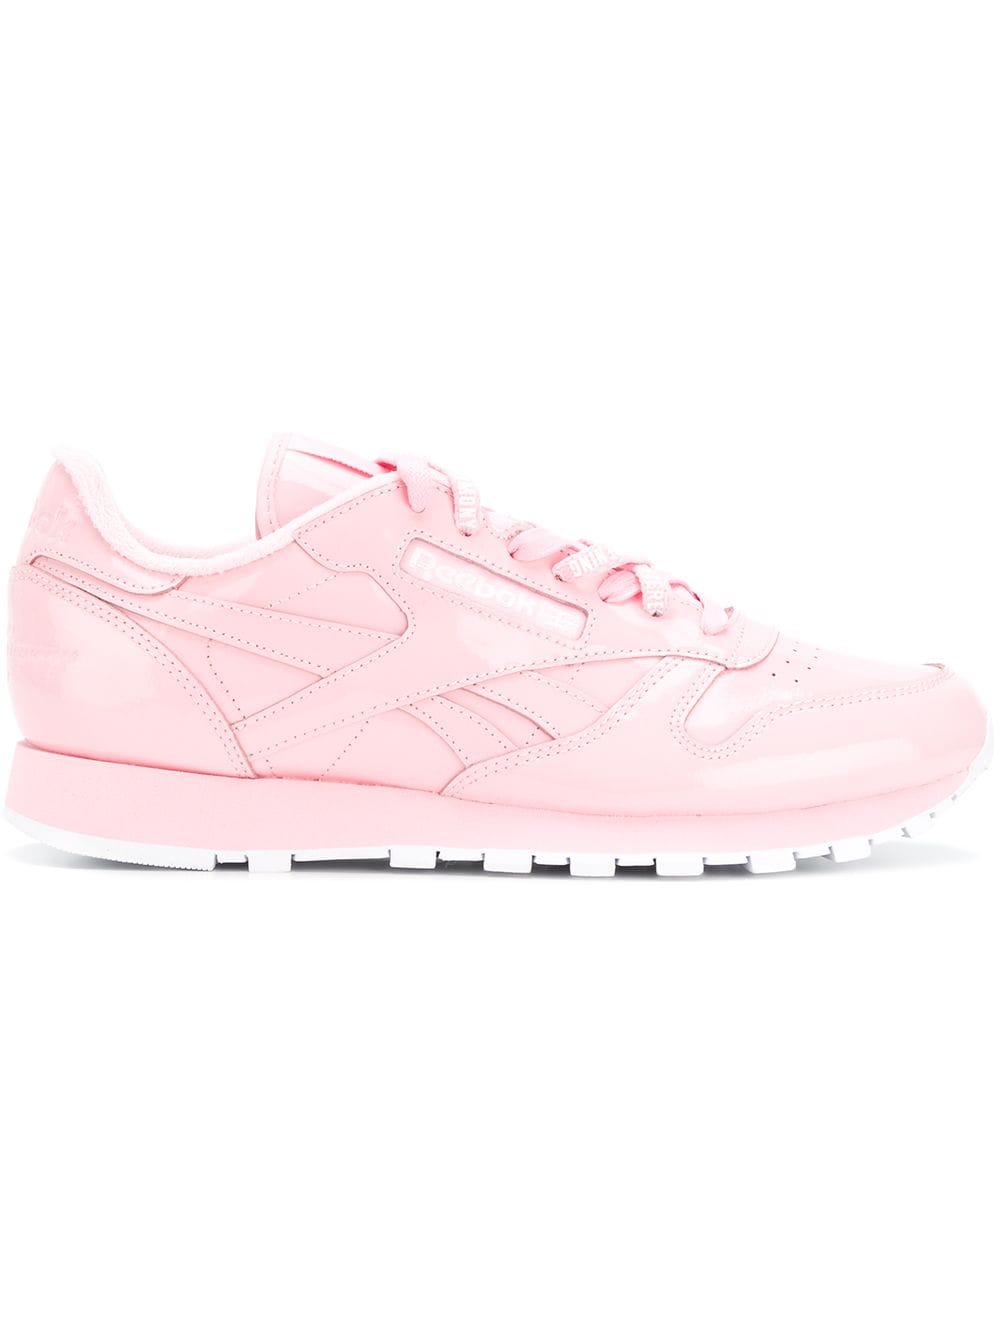 Reebok x Opening Ceremony classic leather sneakers Pink